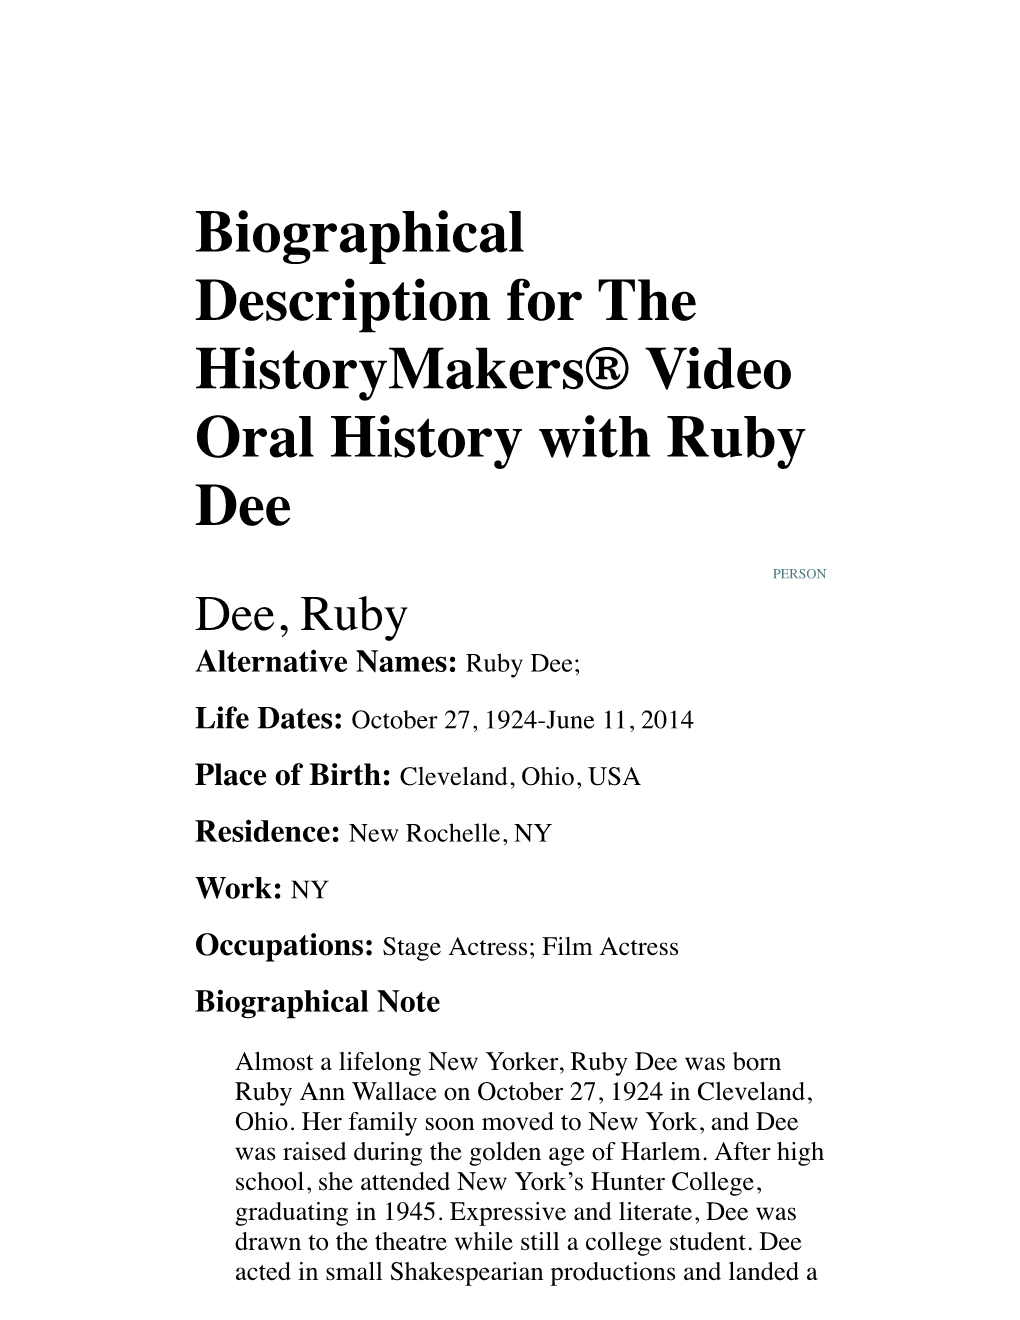 Biographical Description for the Historymakers® Video Oral History with Ruby Dee